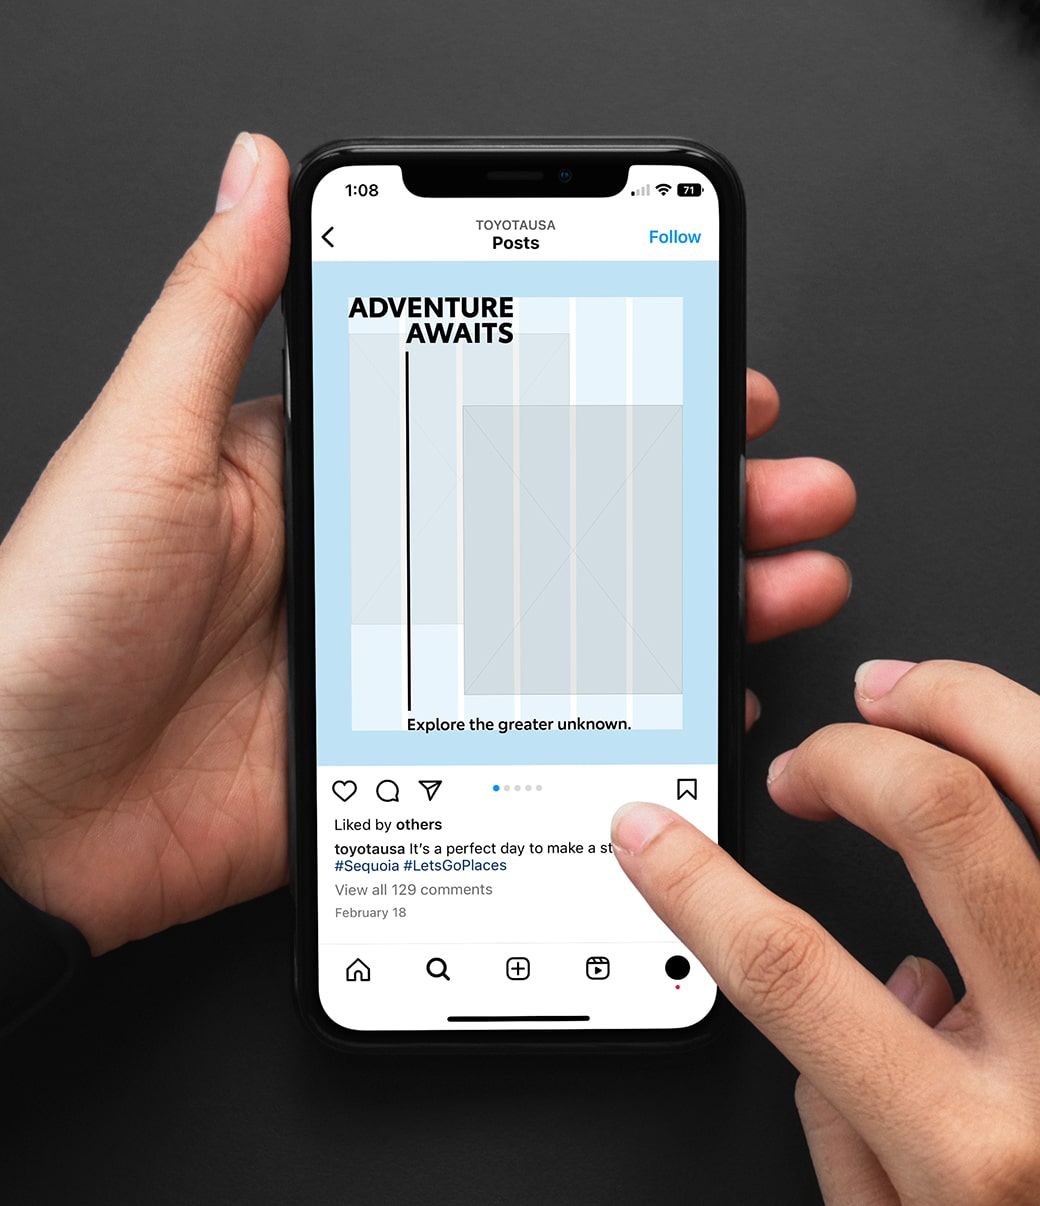 A slider divides an image of a hand holding a phone with a Toyota social media post. The slider moves back and forth to show a layout grid of the post and then the finished post with imagery.